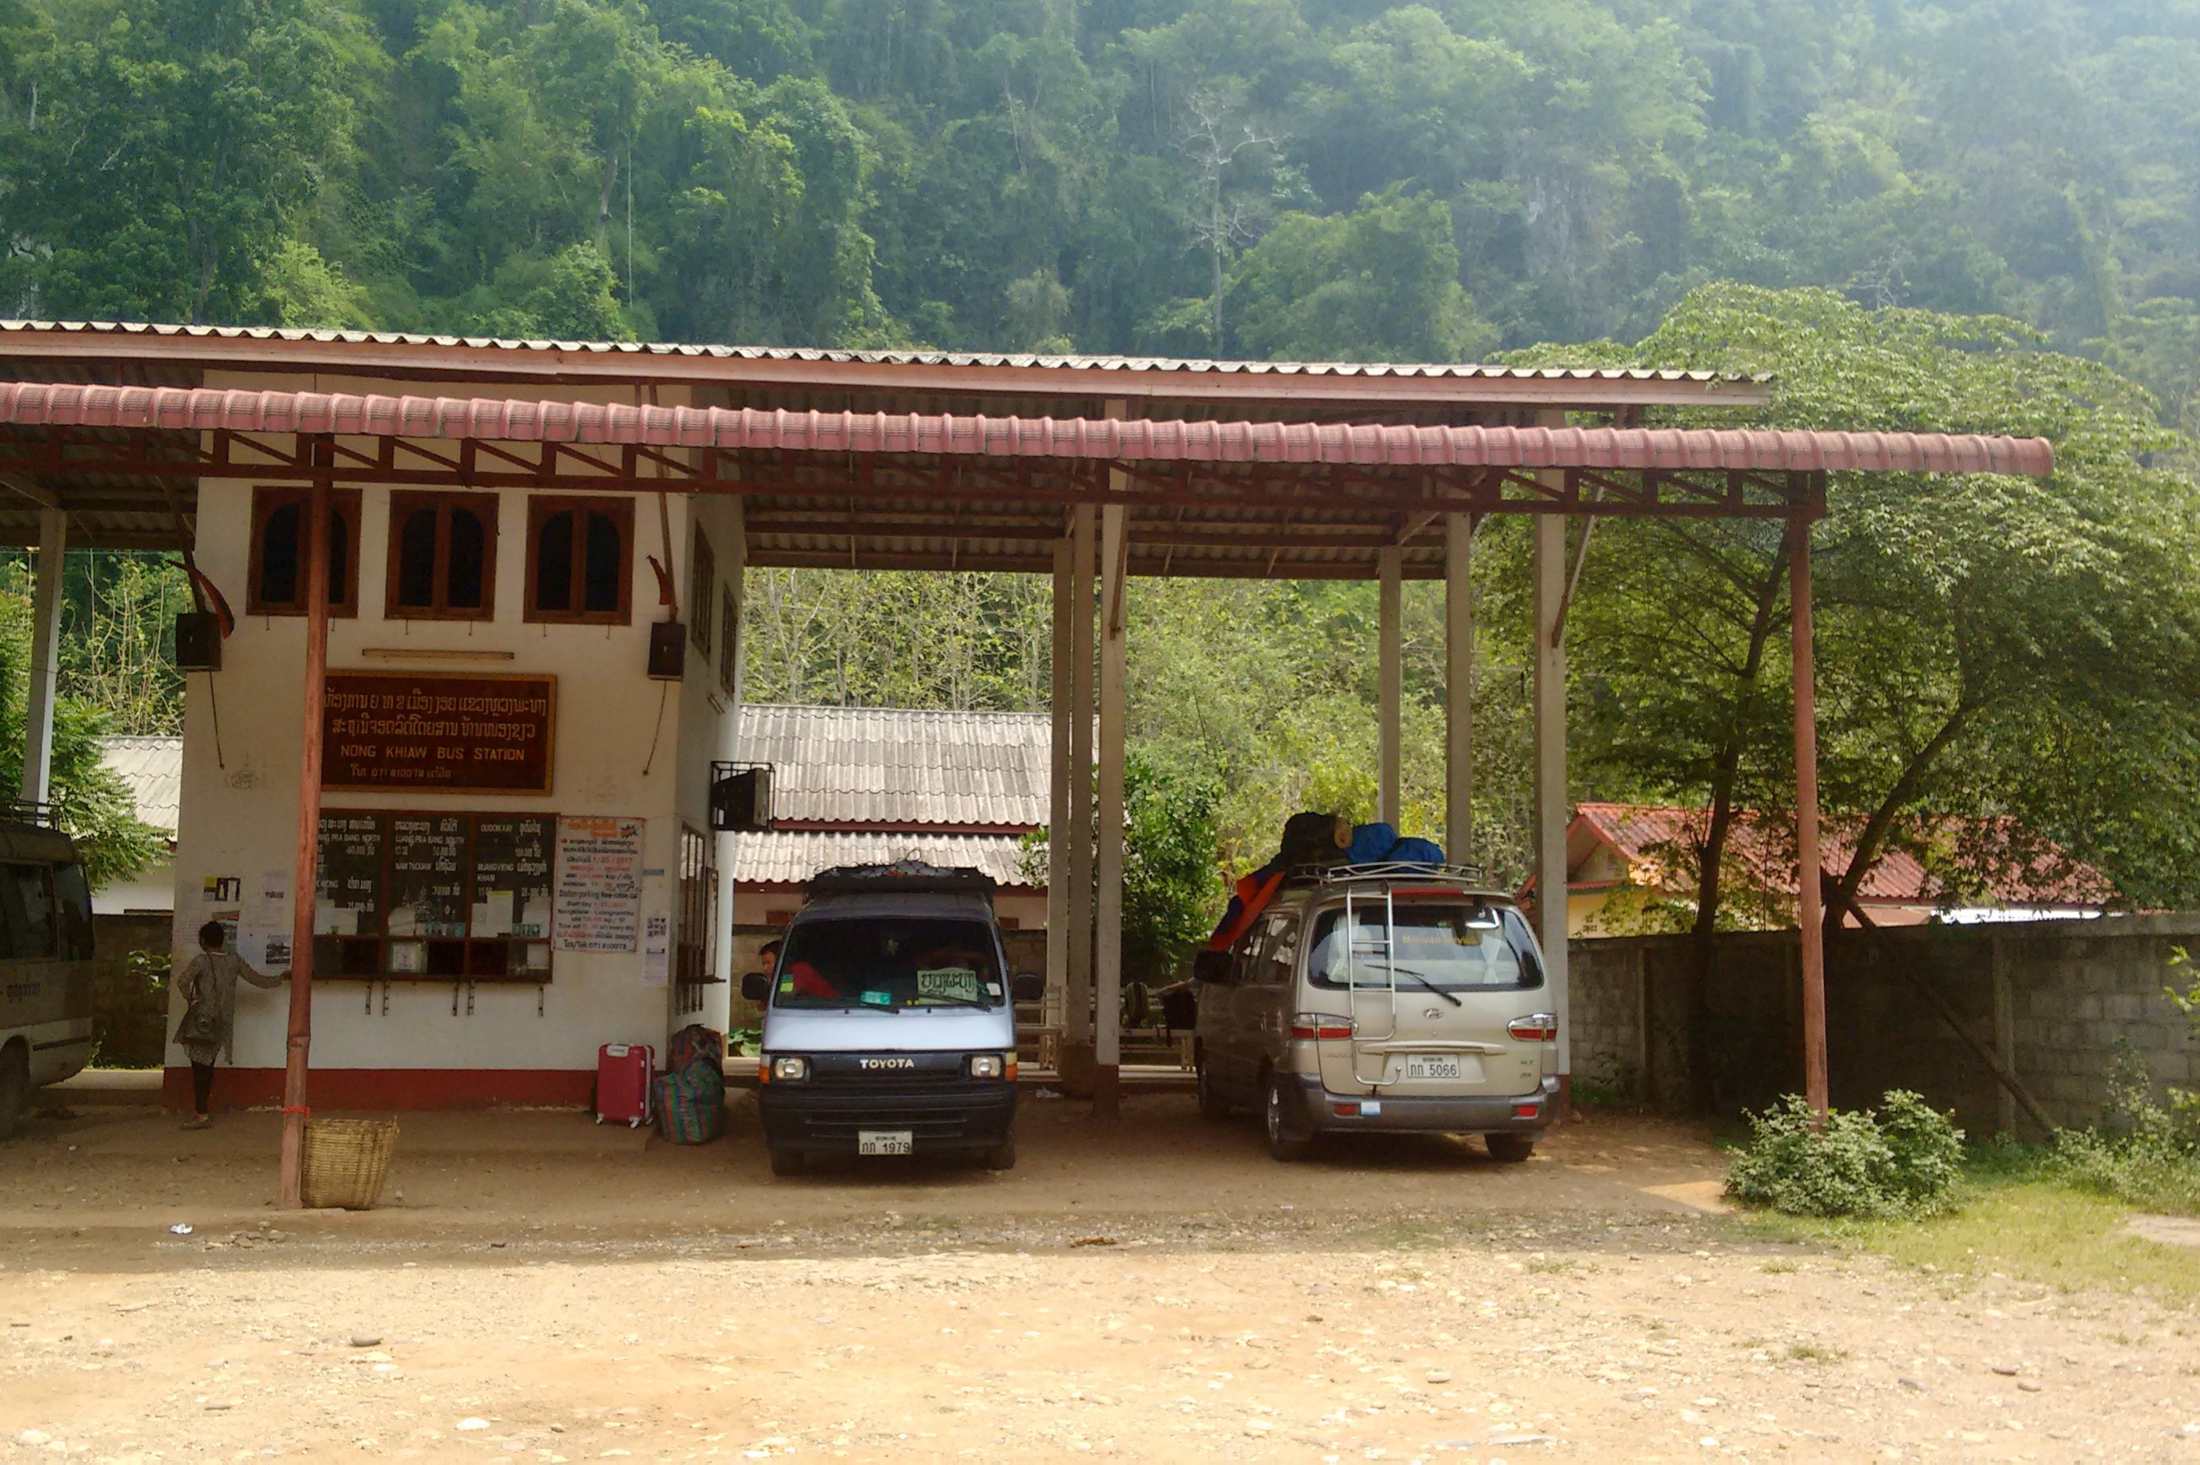 Bus station in Nong Khiaw.